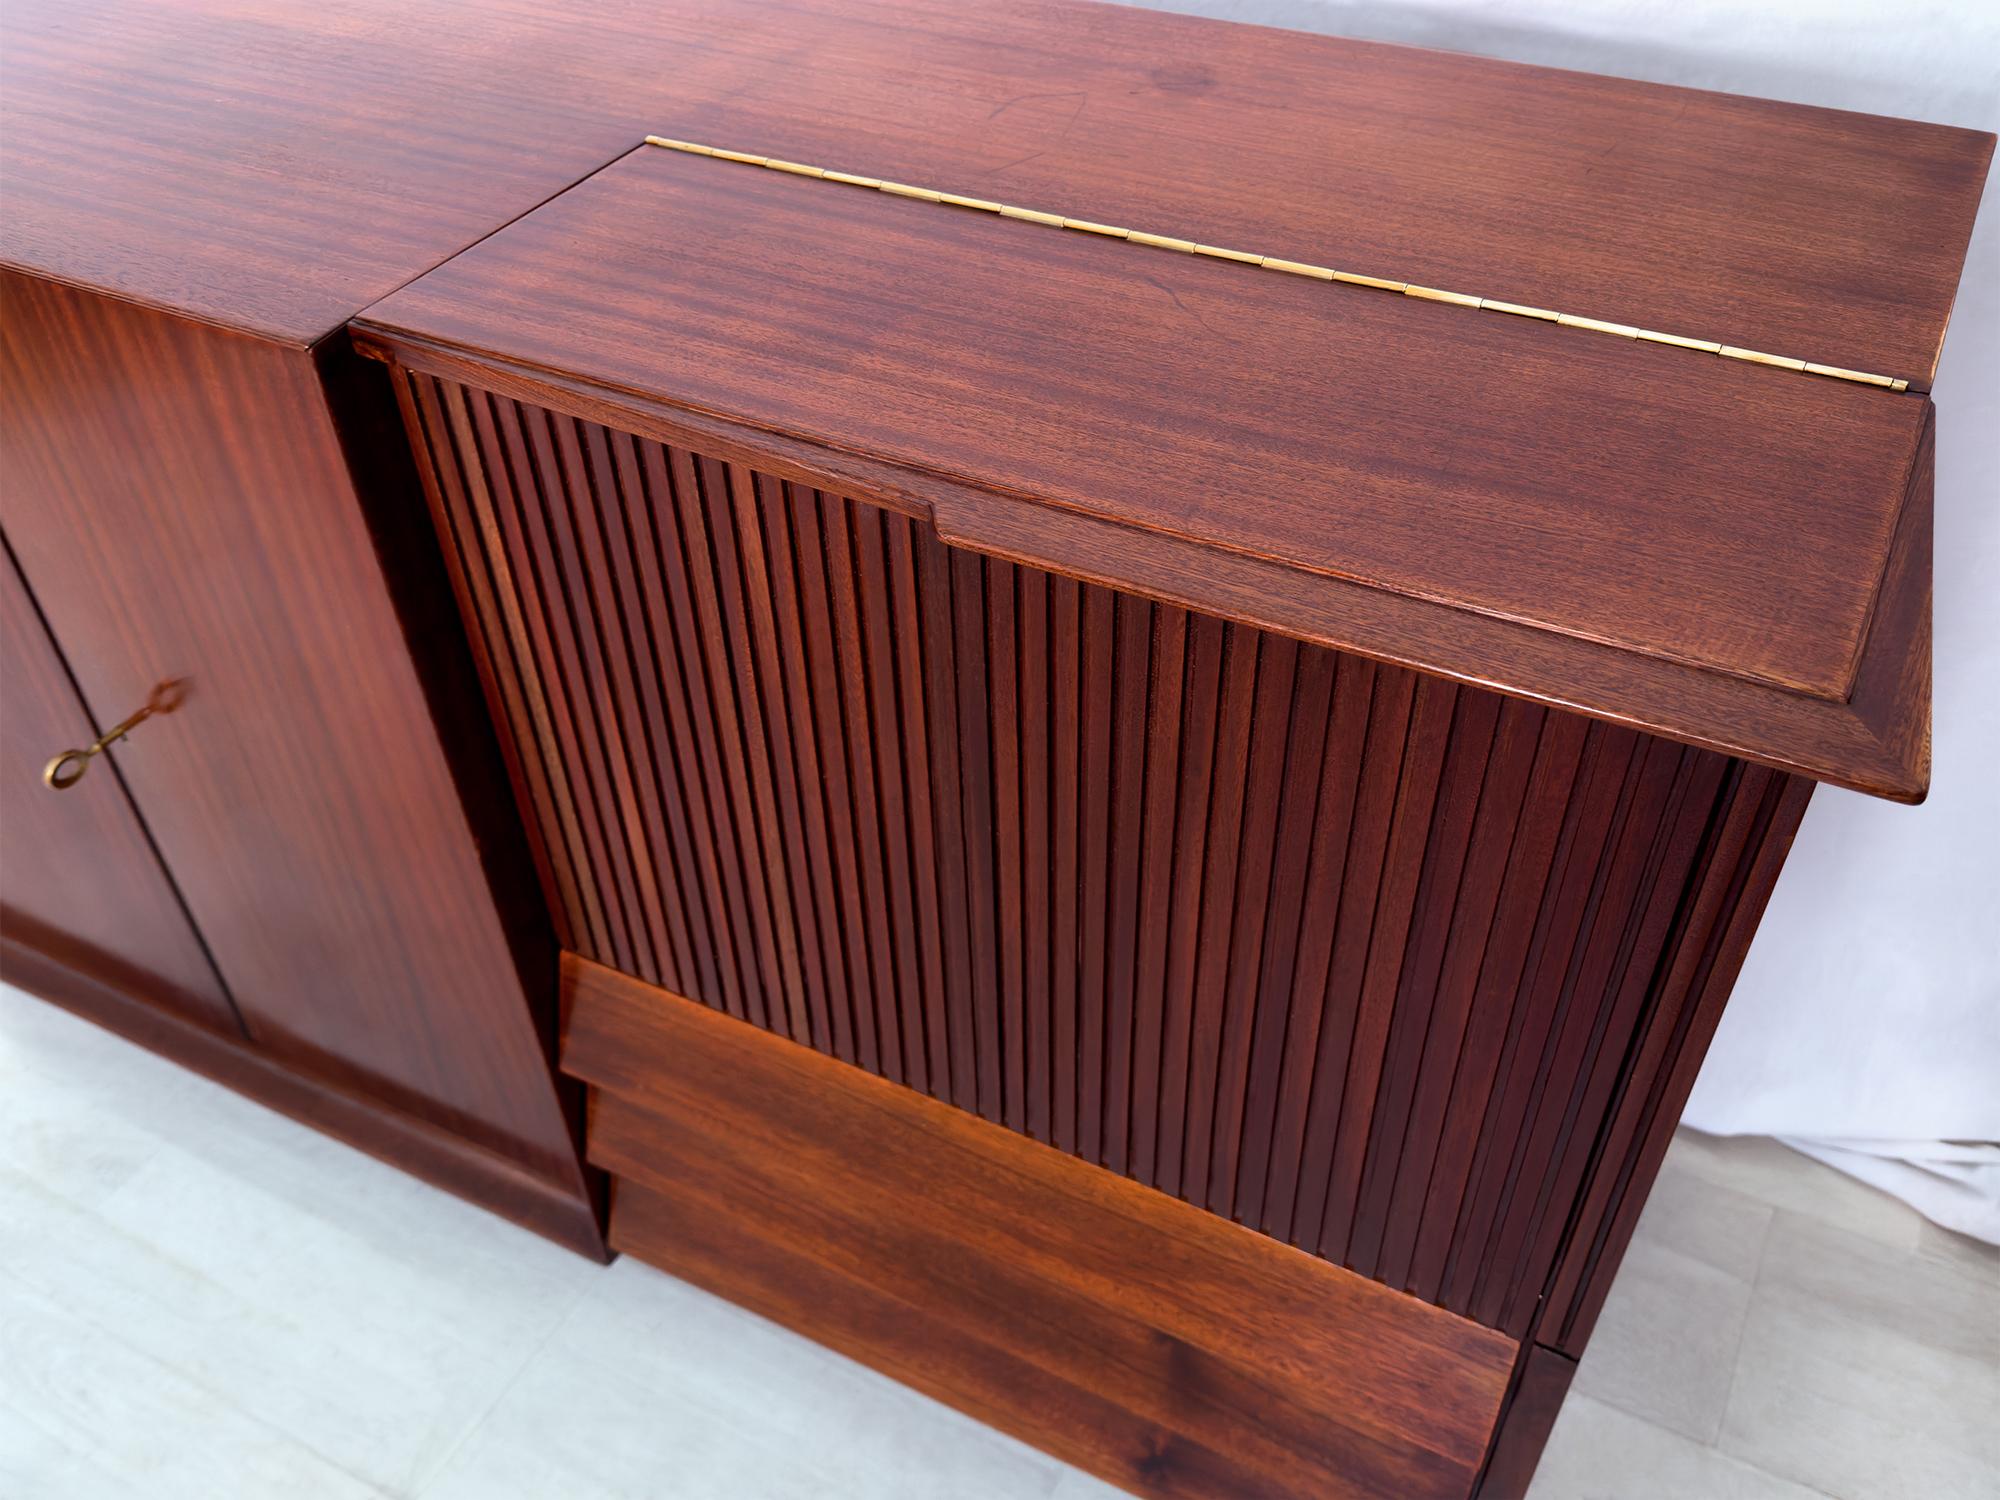 Italian Mid-Century Teak Wood Sideboard with Bar Cabinet by Vittorio Dassi, 1950s For Sale 5